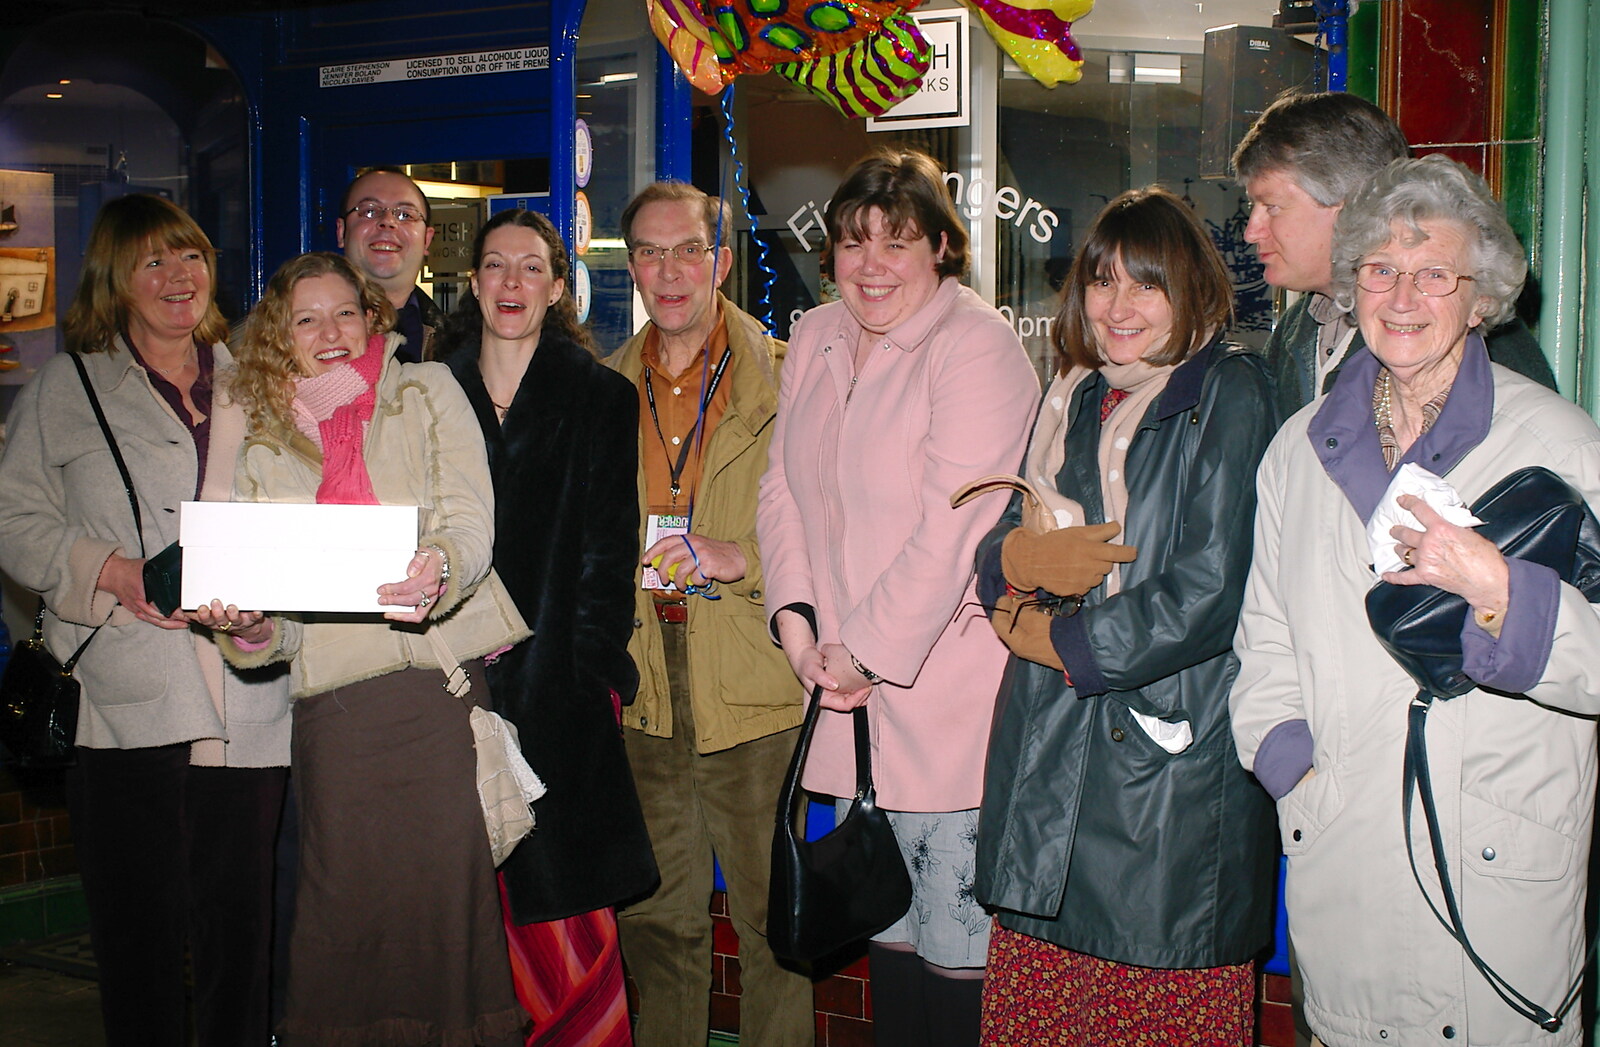 The gang outside the restaurant from Mike's 70th Birthday, Christchurch, Dorset - 12th March 2005